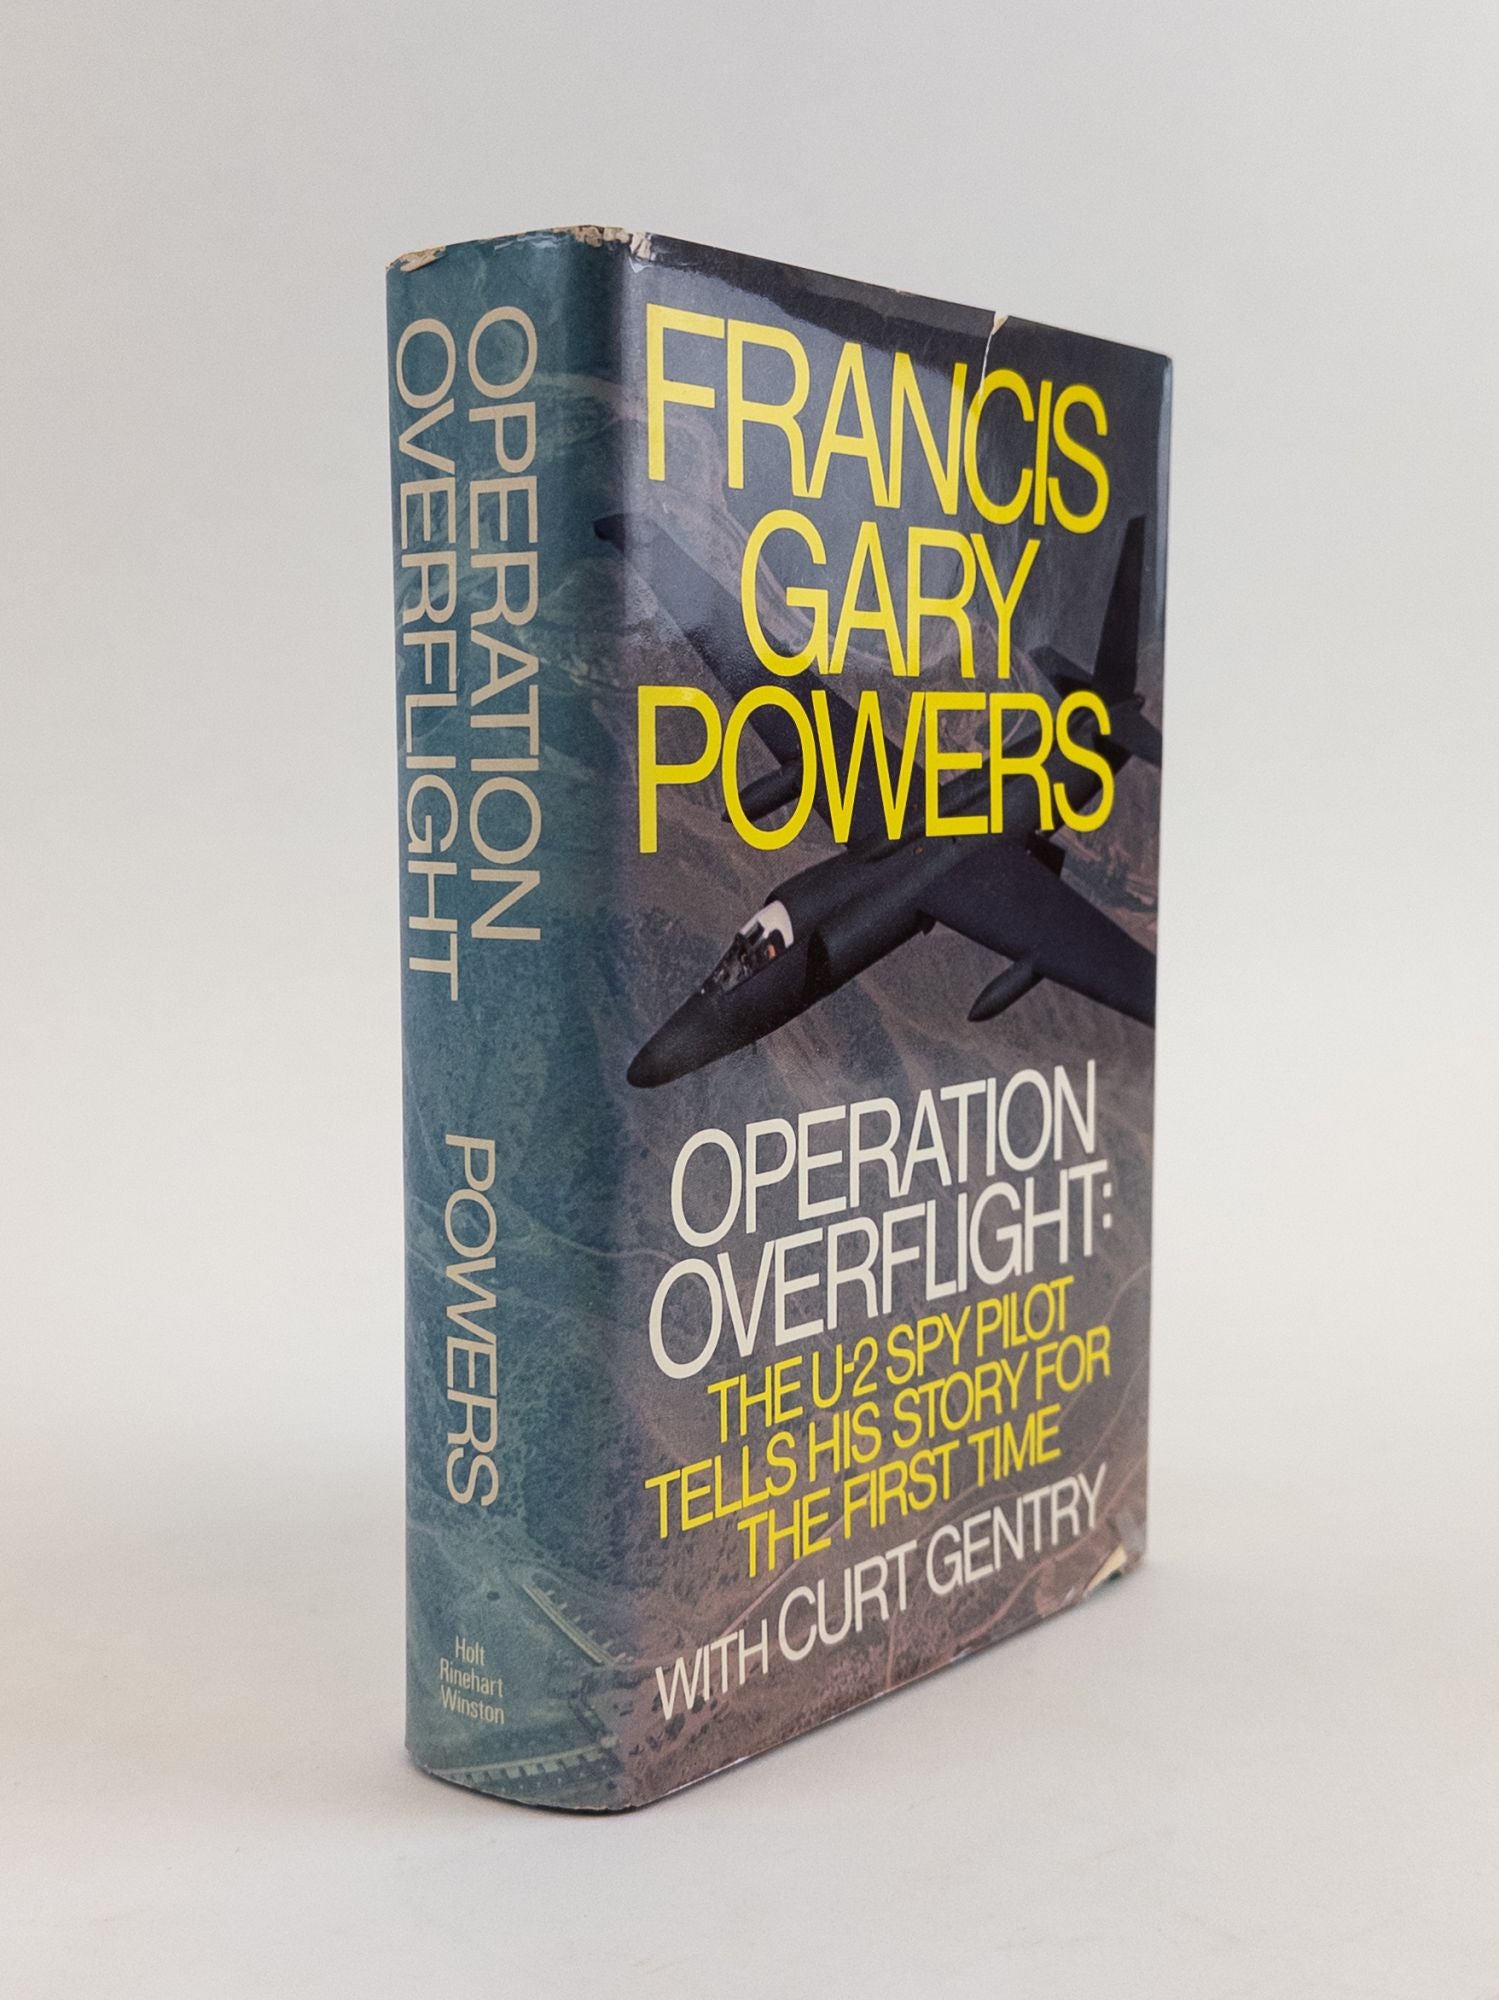 Product Image for OPERATION OVERFLIGHT: THE U-2 SPY PILOT TELLS HIS STORY FOR THE FIRST TIME [Signed by Powers]